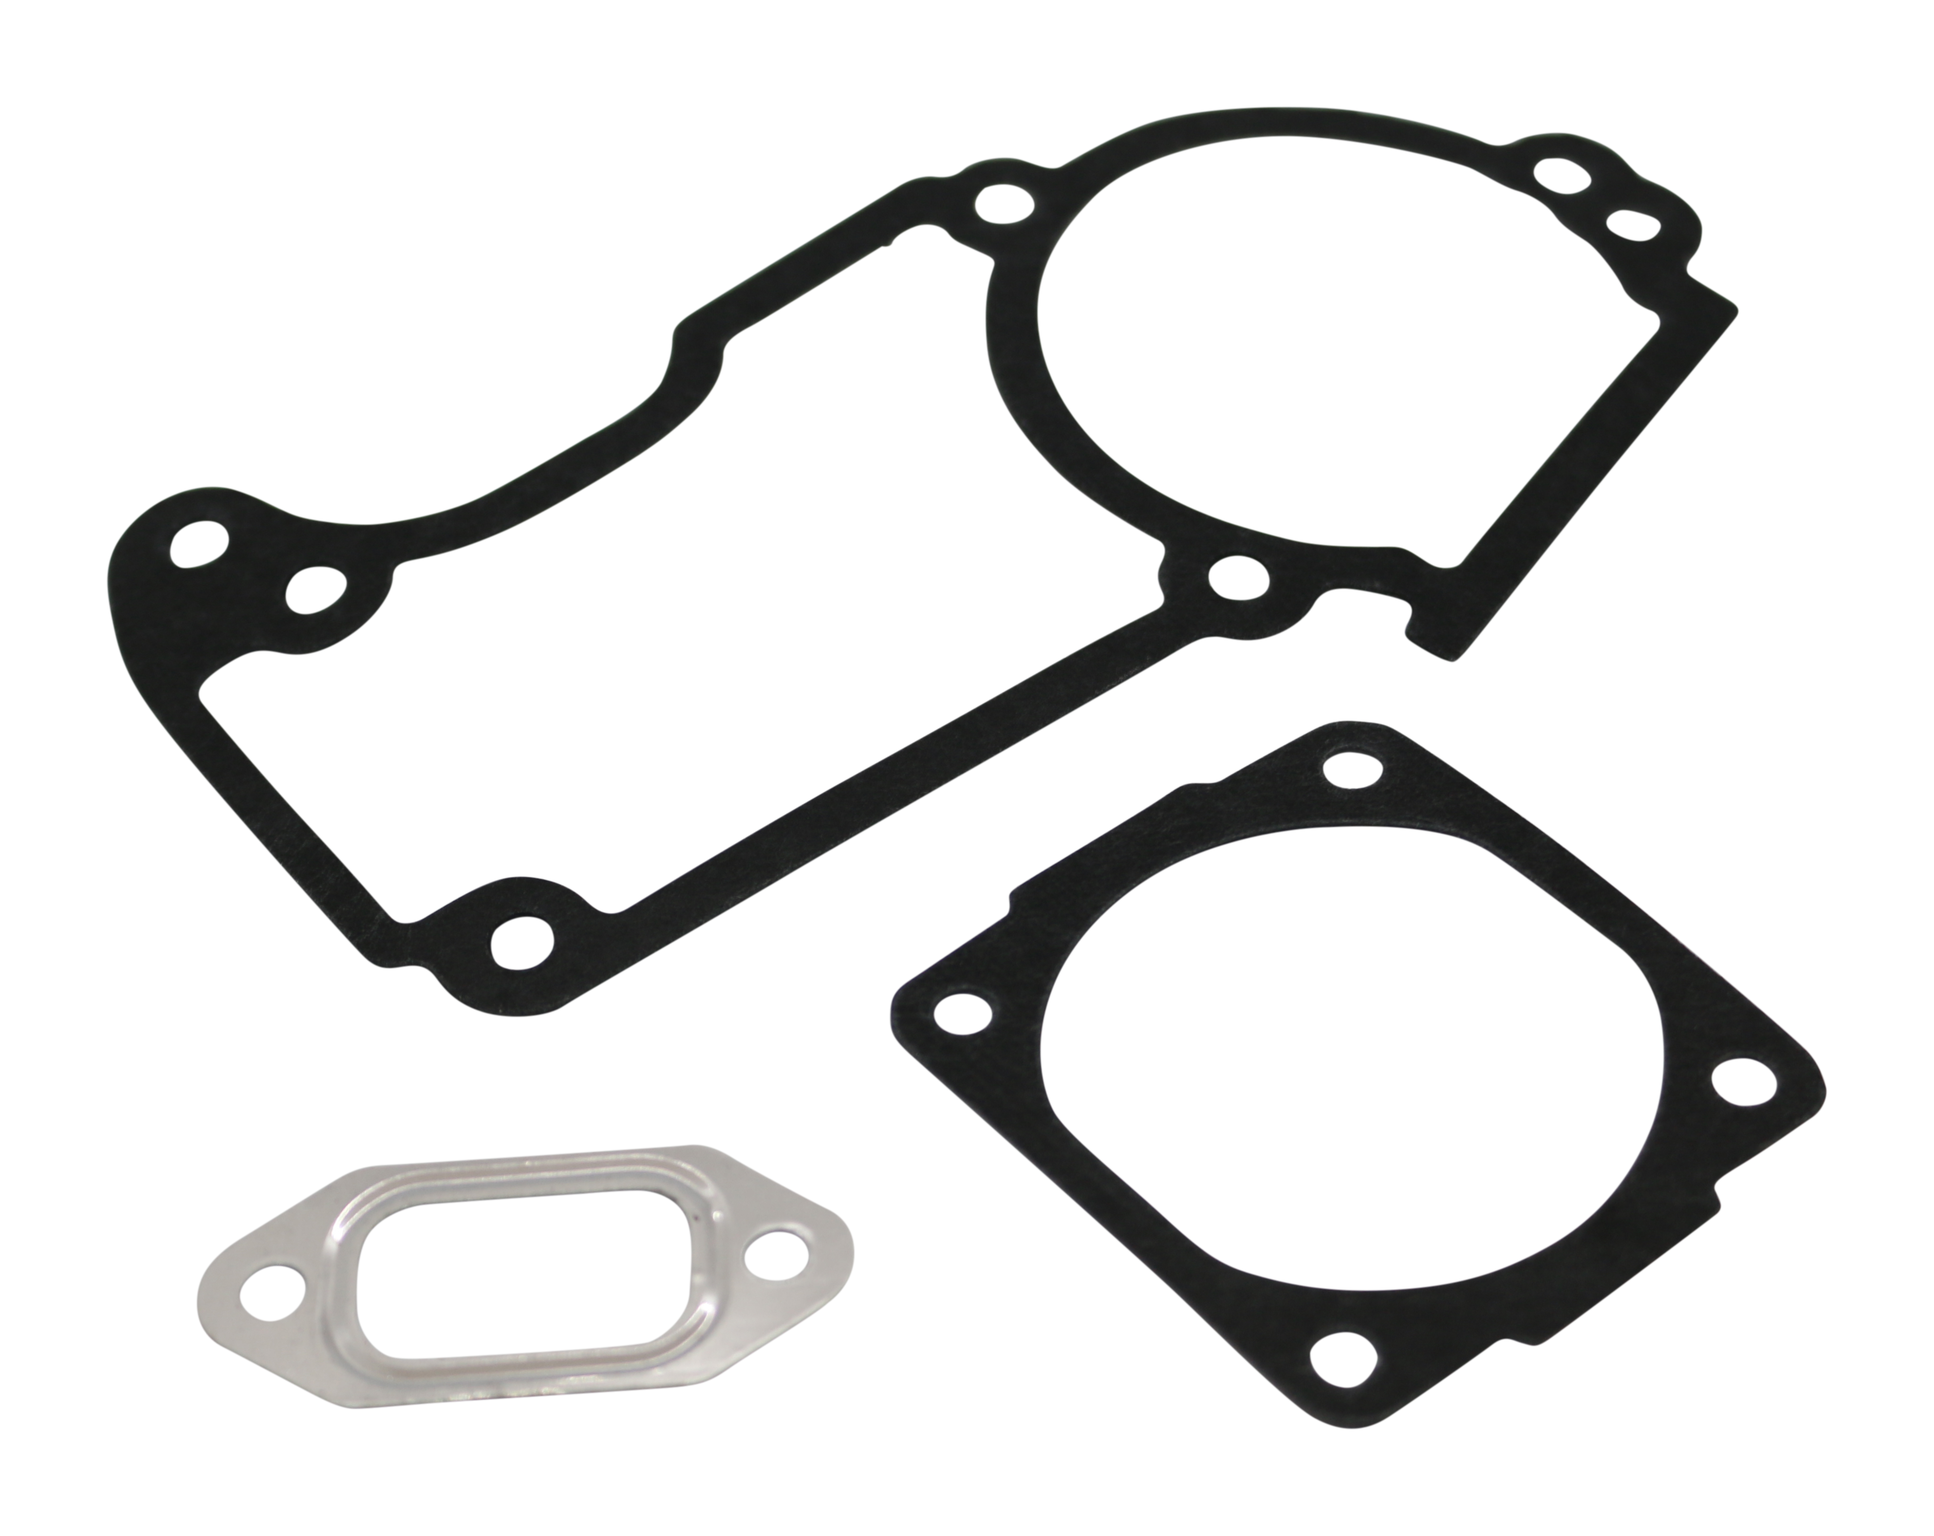 Crankcase Gasket Set For Stihl MS260 MS240 026 024 Chainsaw 1121 029 0500